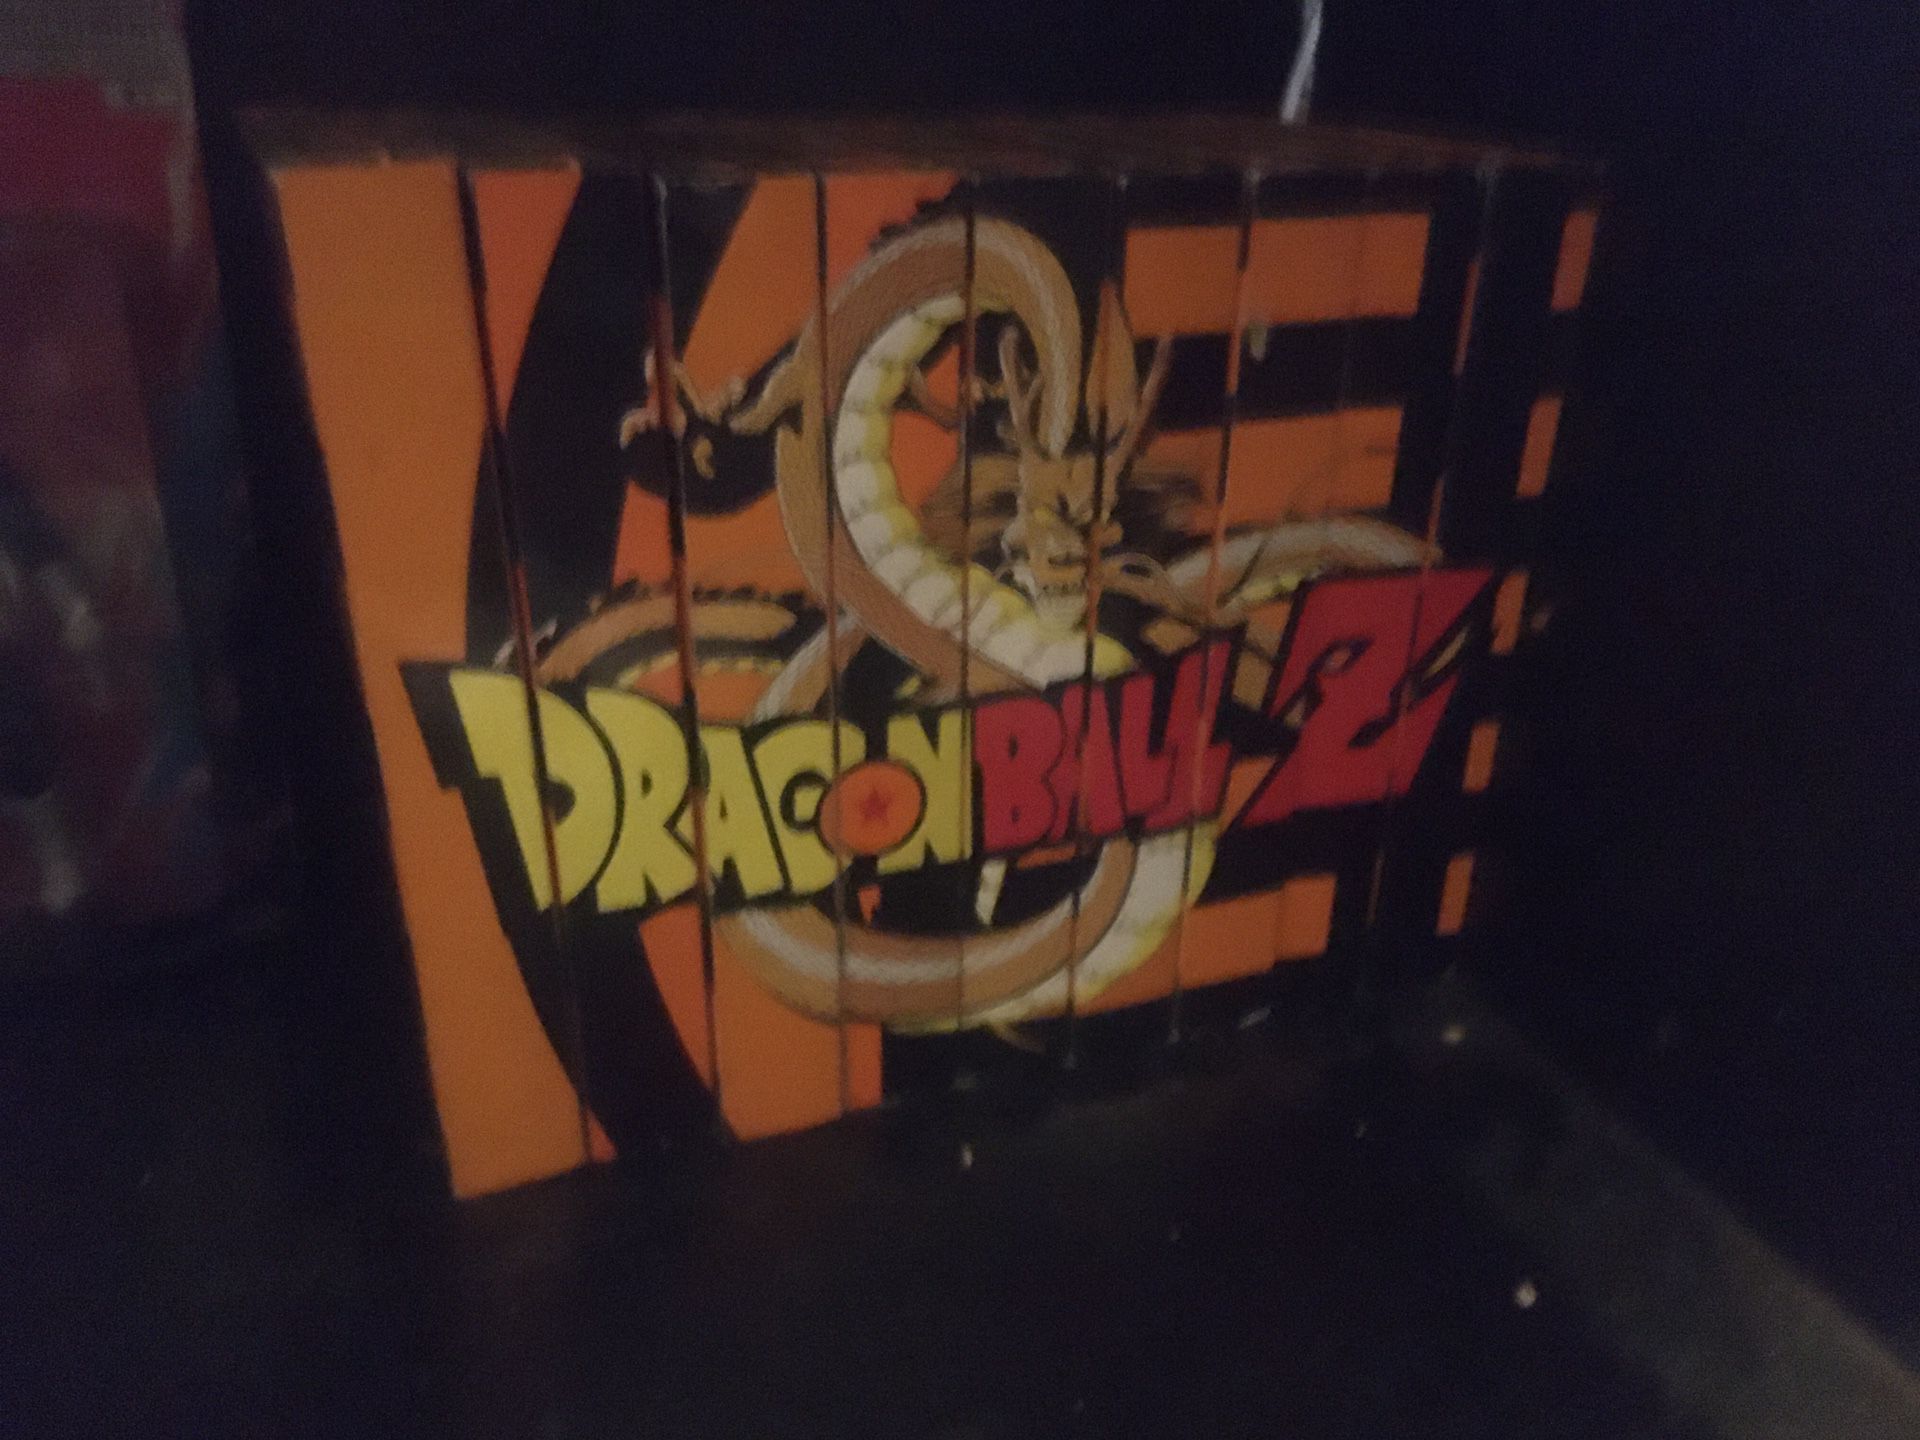 The complete collection of dragon ball Z